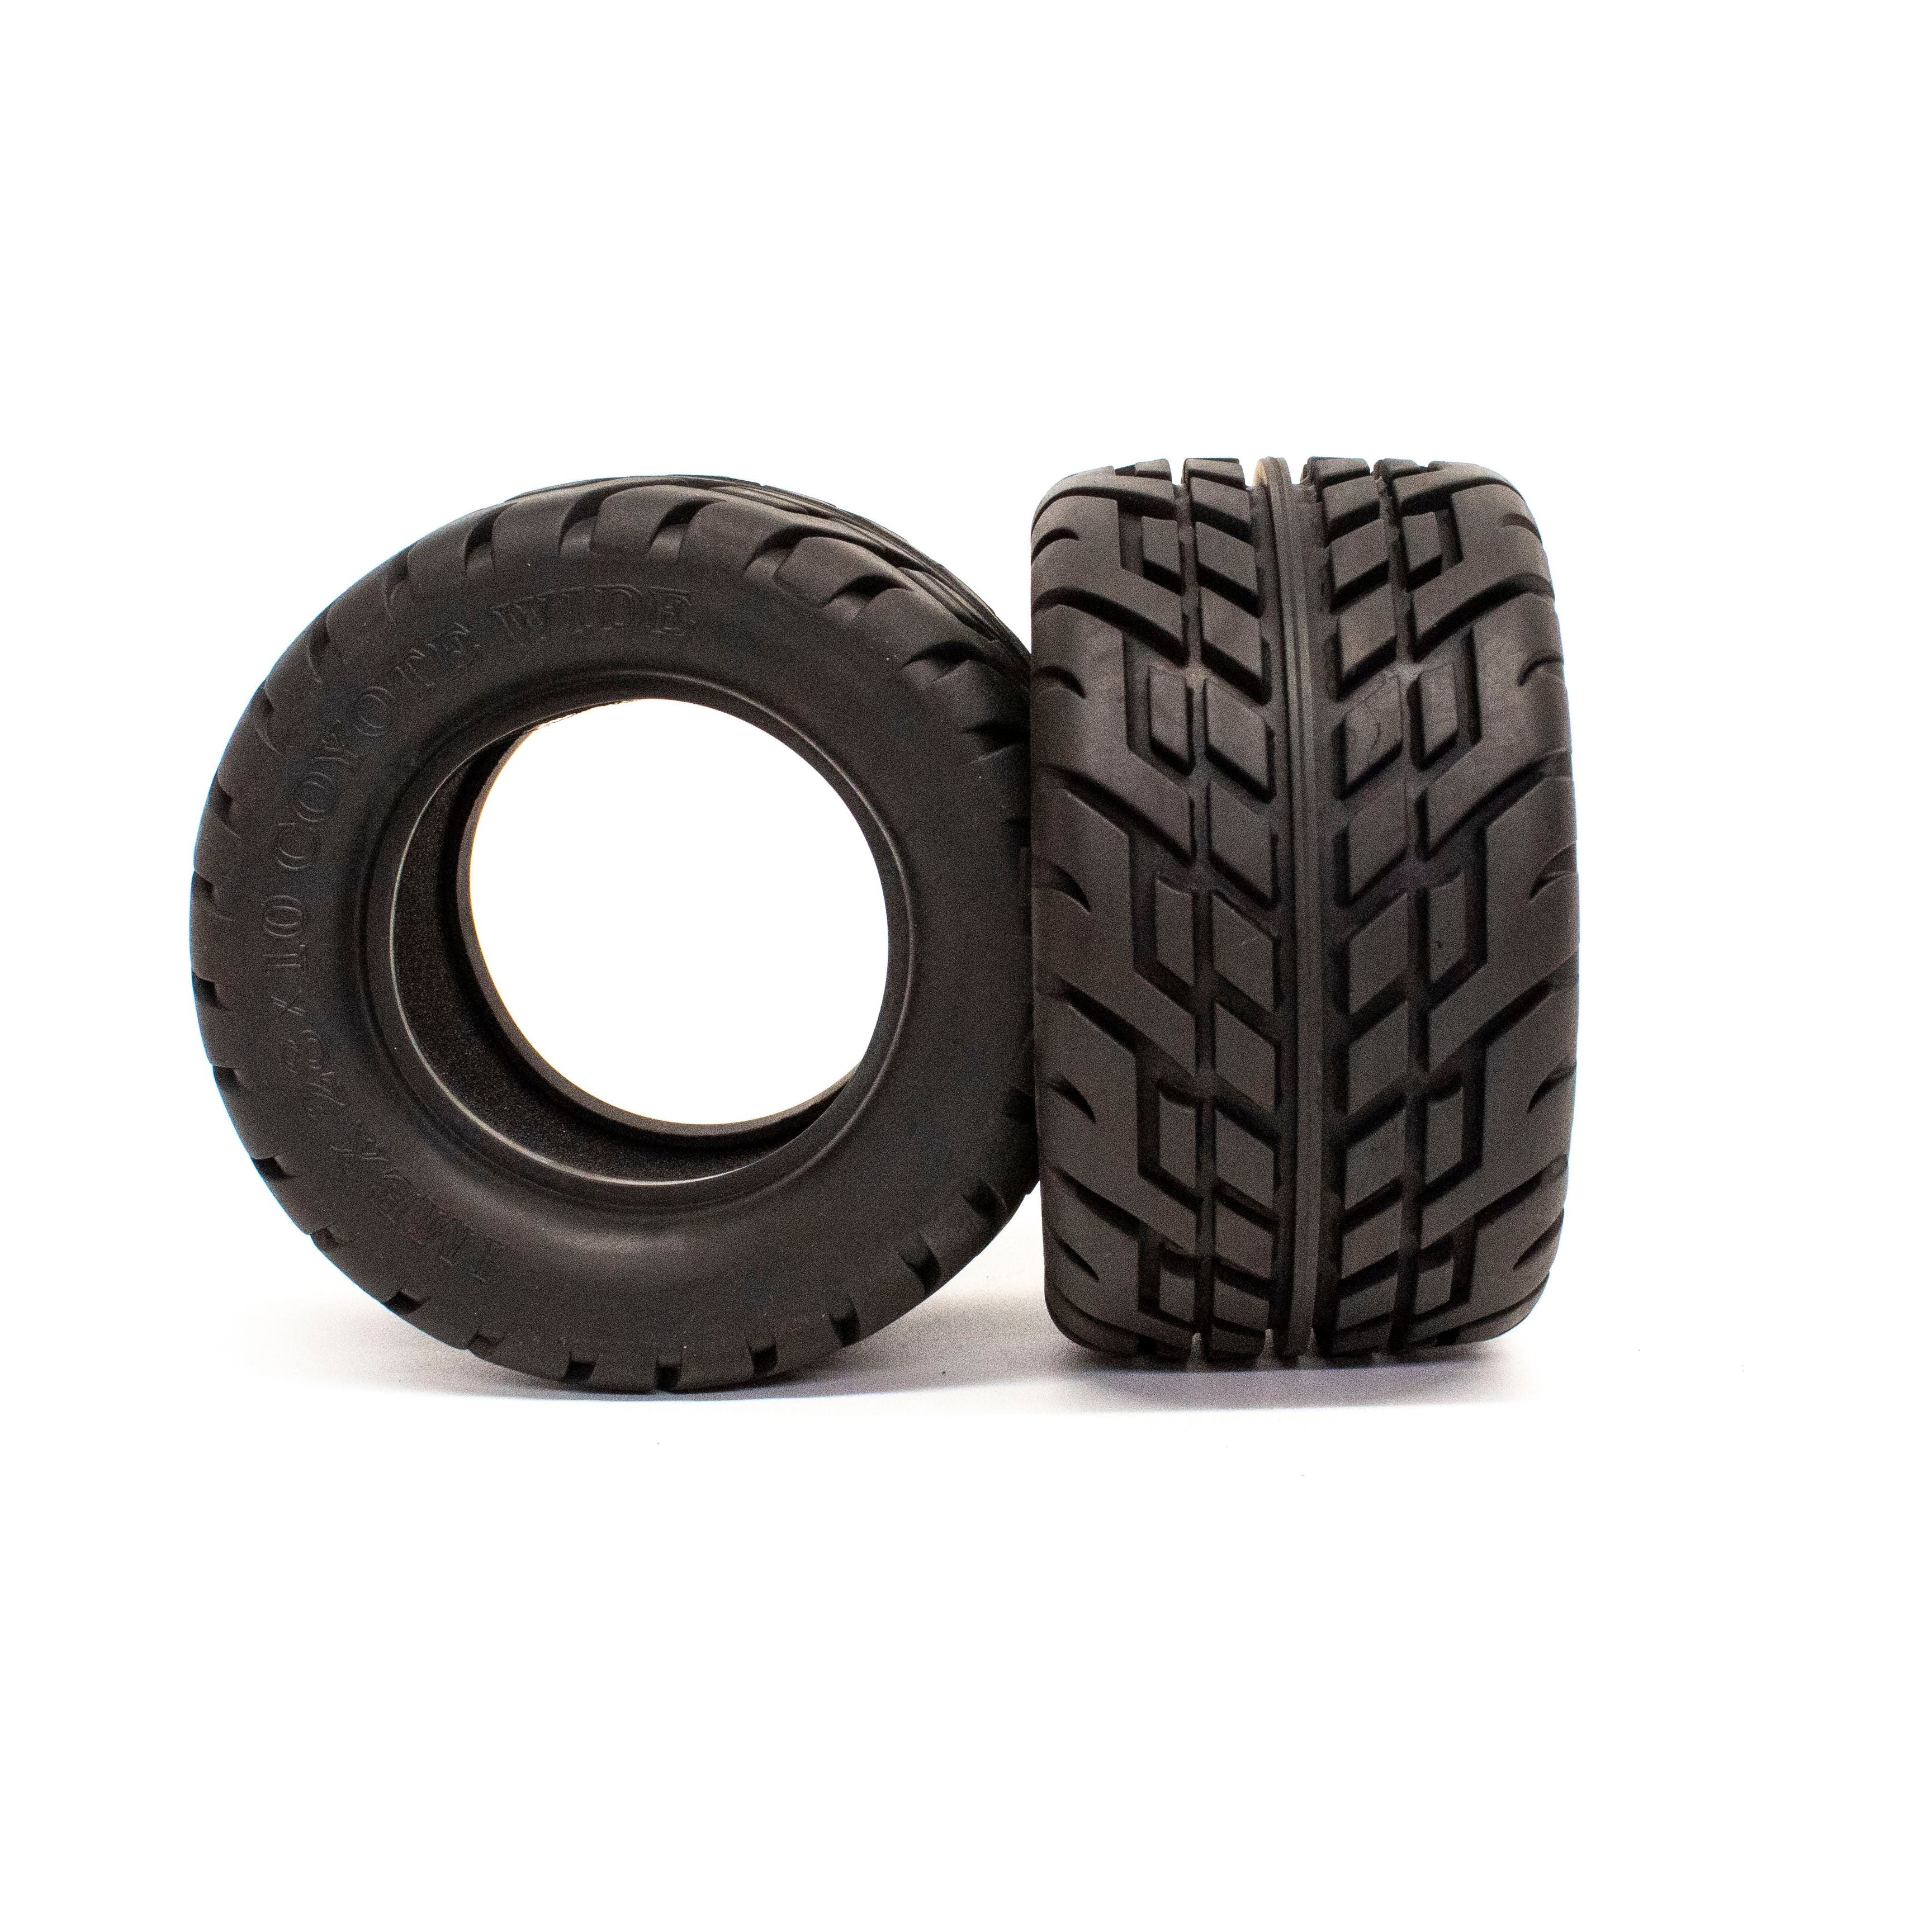 IMEX 2.8 Coyote Wide Tires (1 Pair)